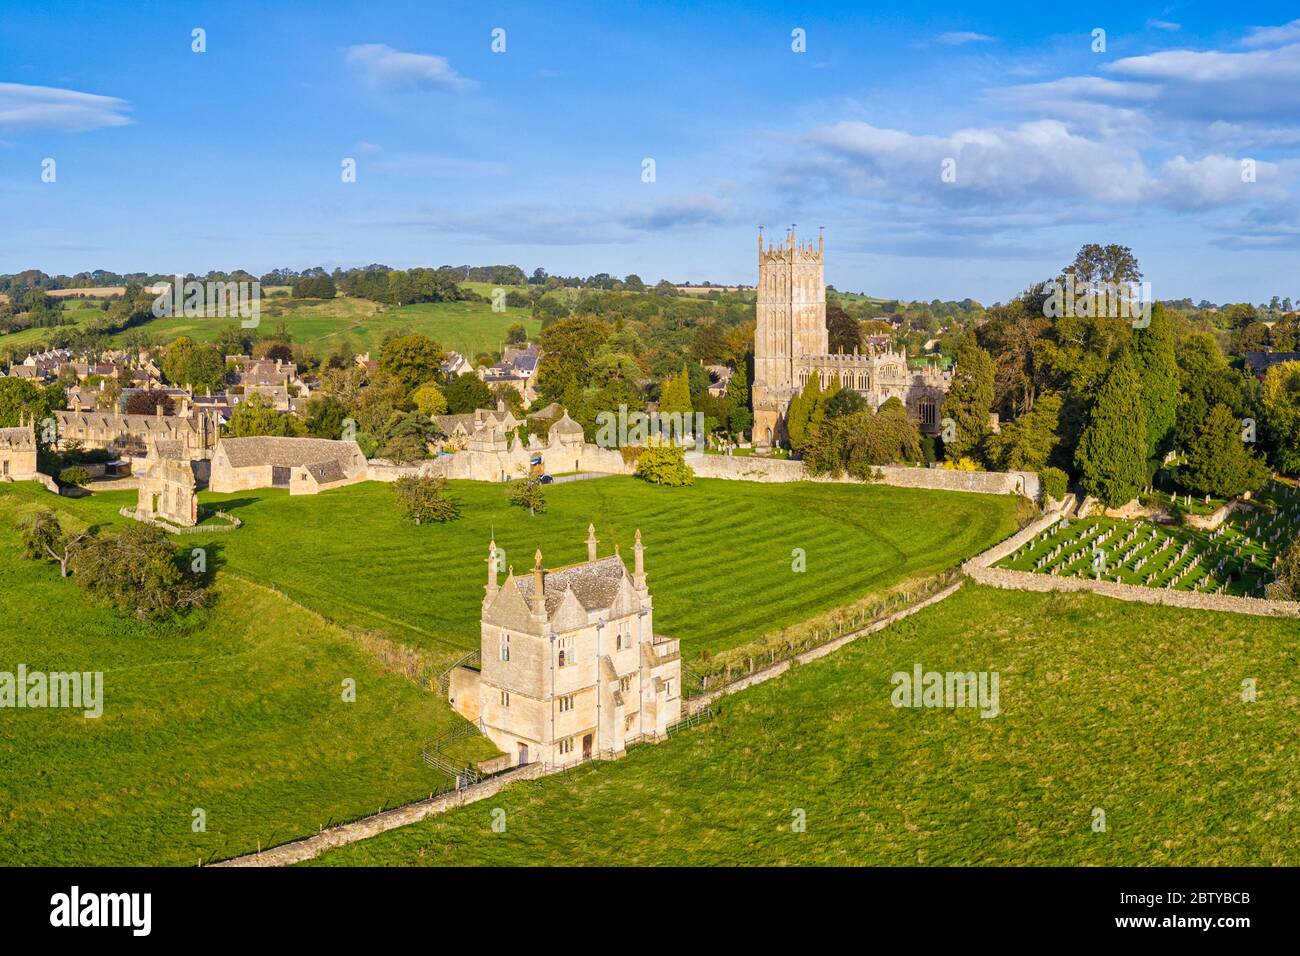 East Banqueting House et St. James' Church, Chipping Campden, Cotswolds, Gloucestershire, Angleterre, Royaume-Uni, Europe Banque D'Images